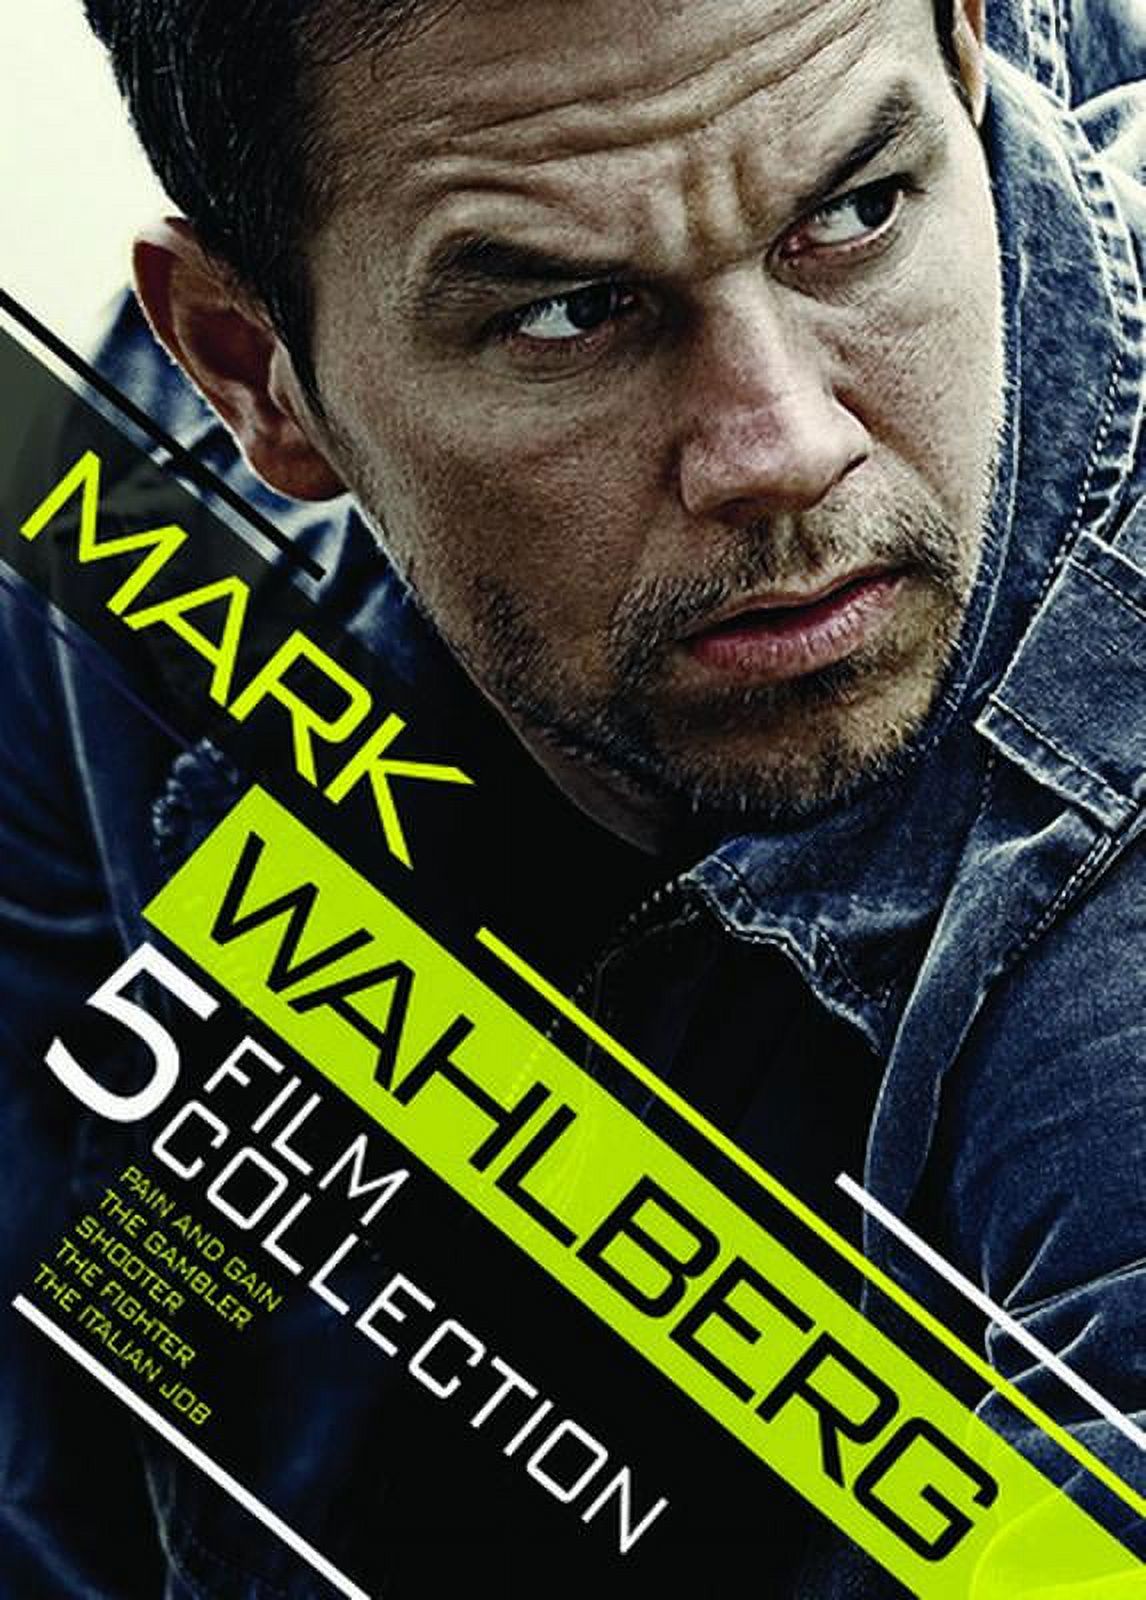 The Mark Wahlberg: 5-Film Collection (DVD) - image 1 of 2